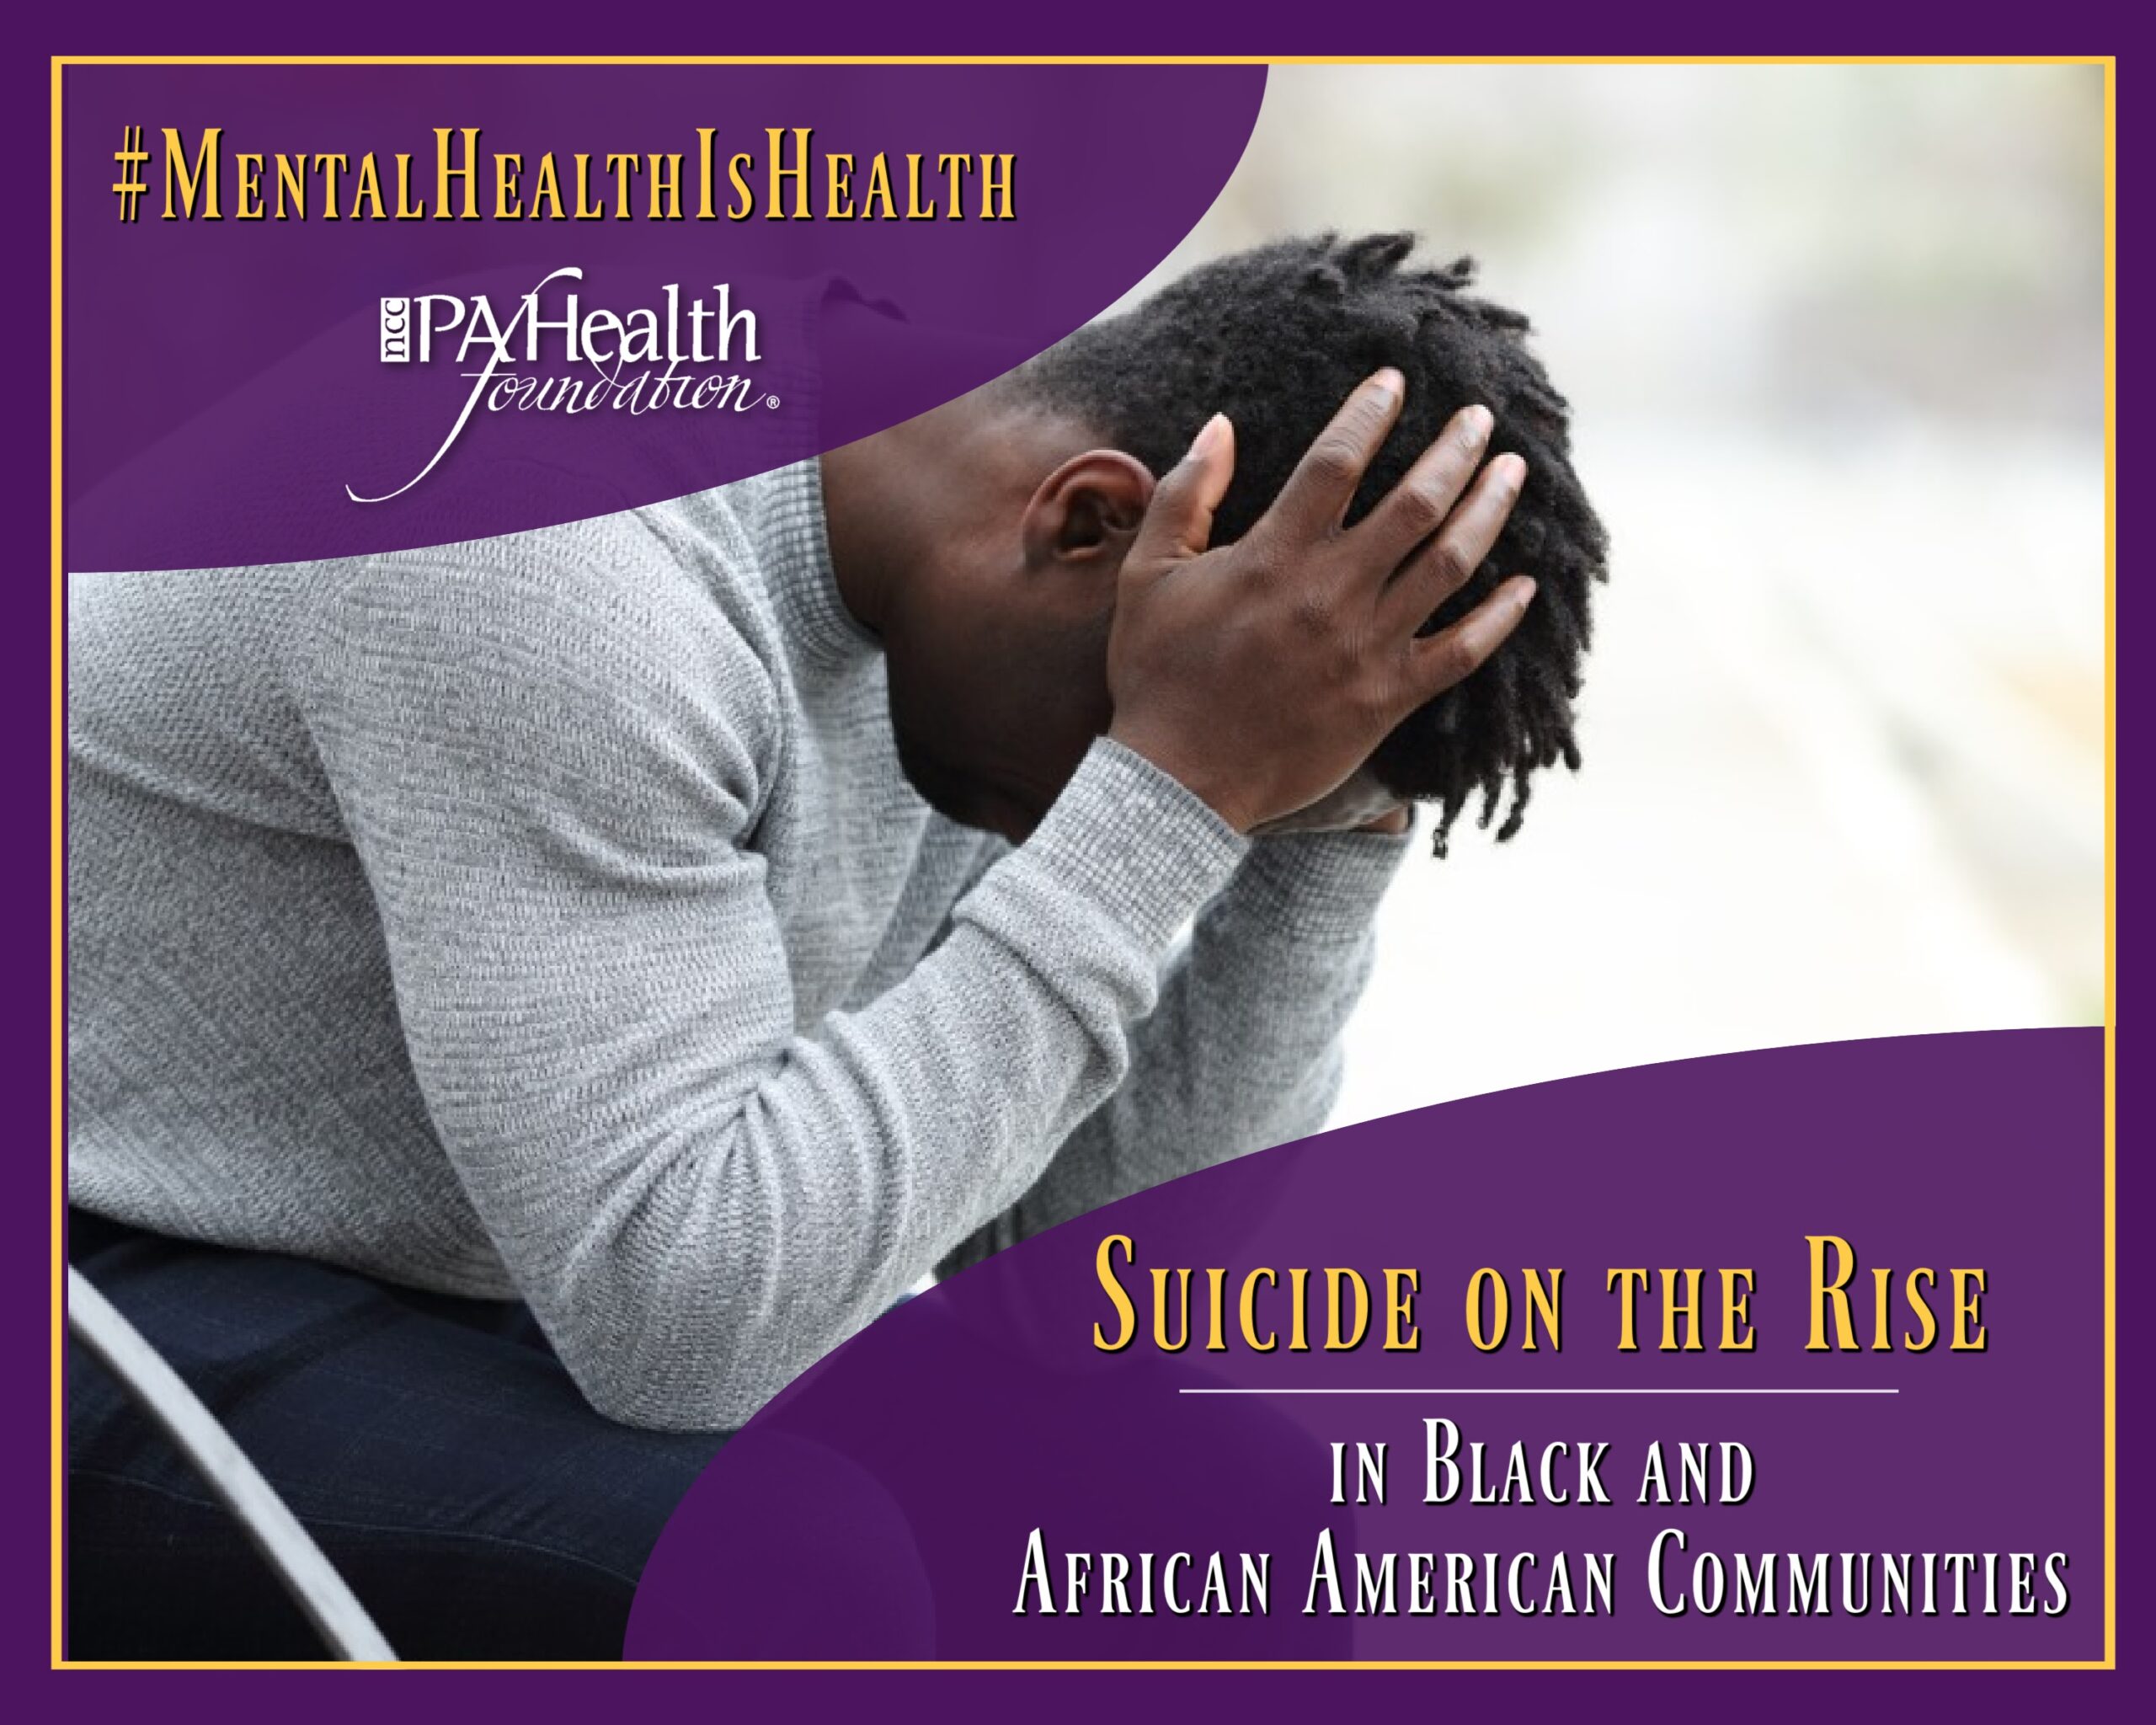 Suicide in the African American Community